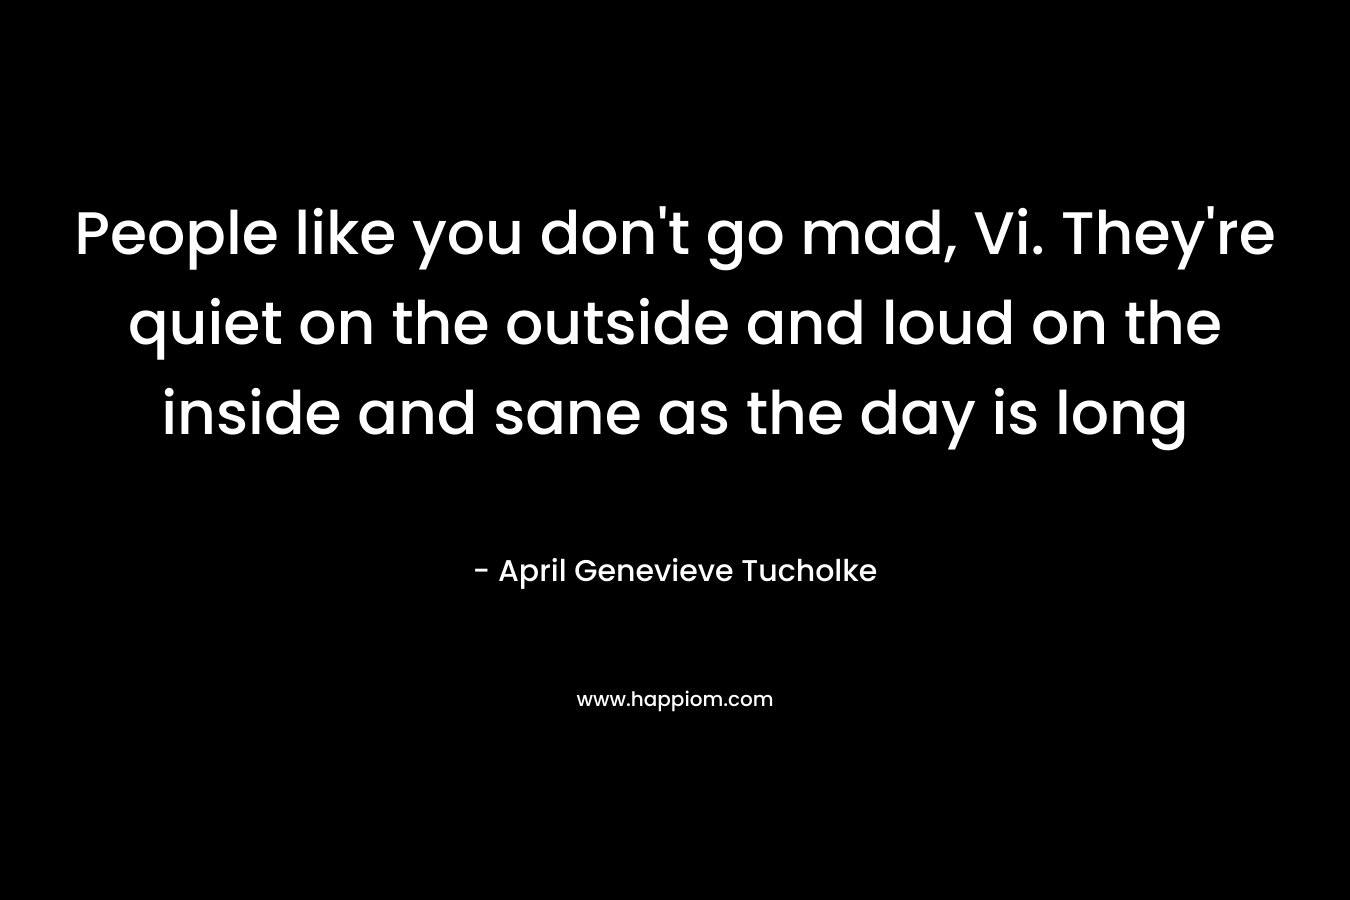 People like you don’t go mad, Vi. They’re quiet on the outside and loud on the inside and sane as the day is long – April Genevieve Tucholke